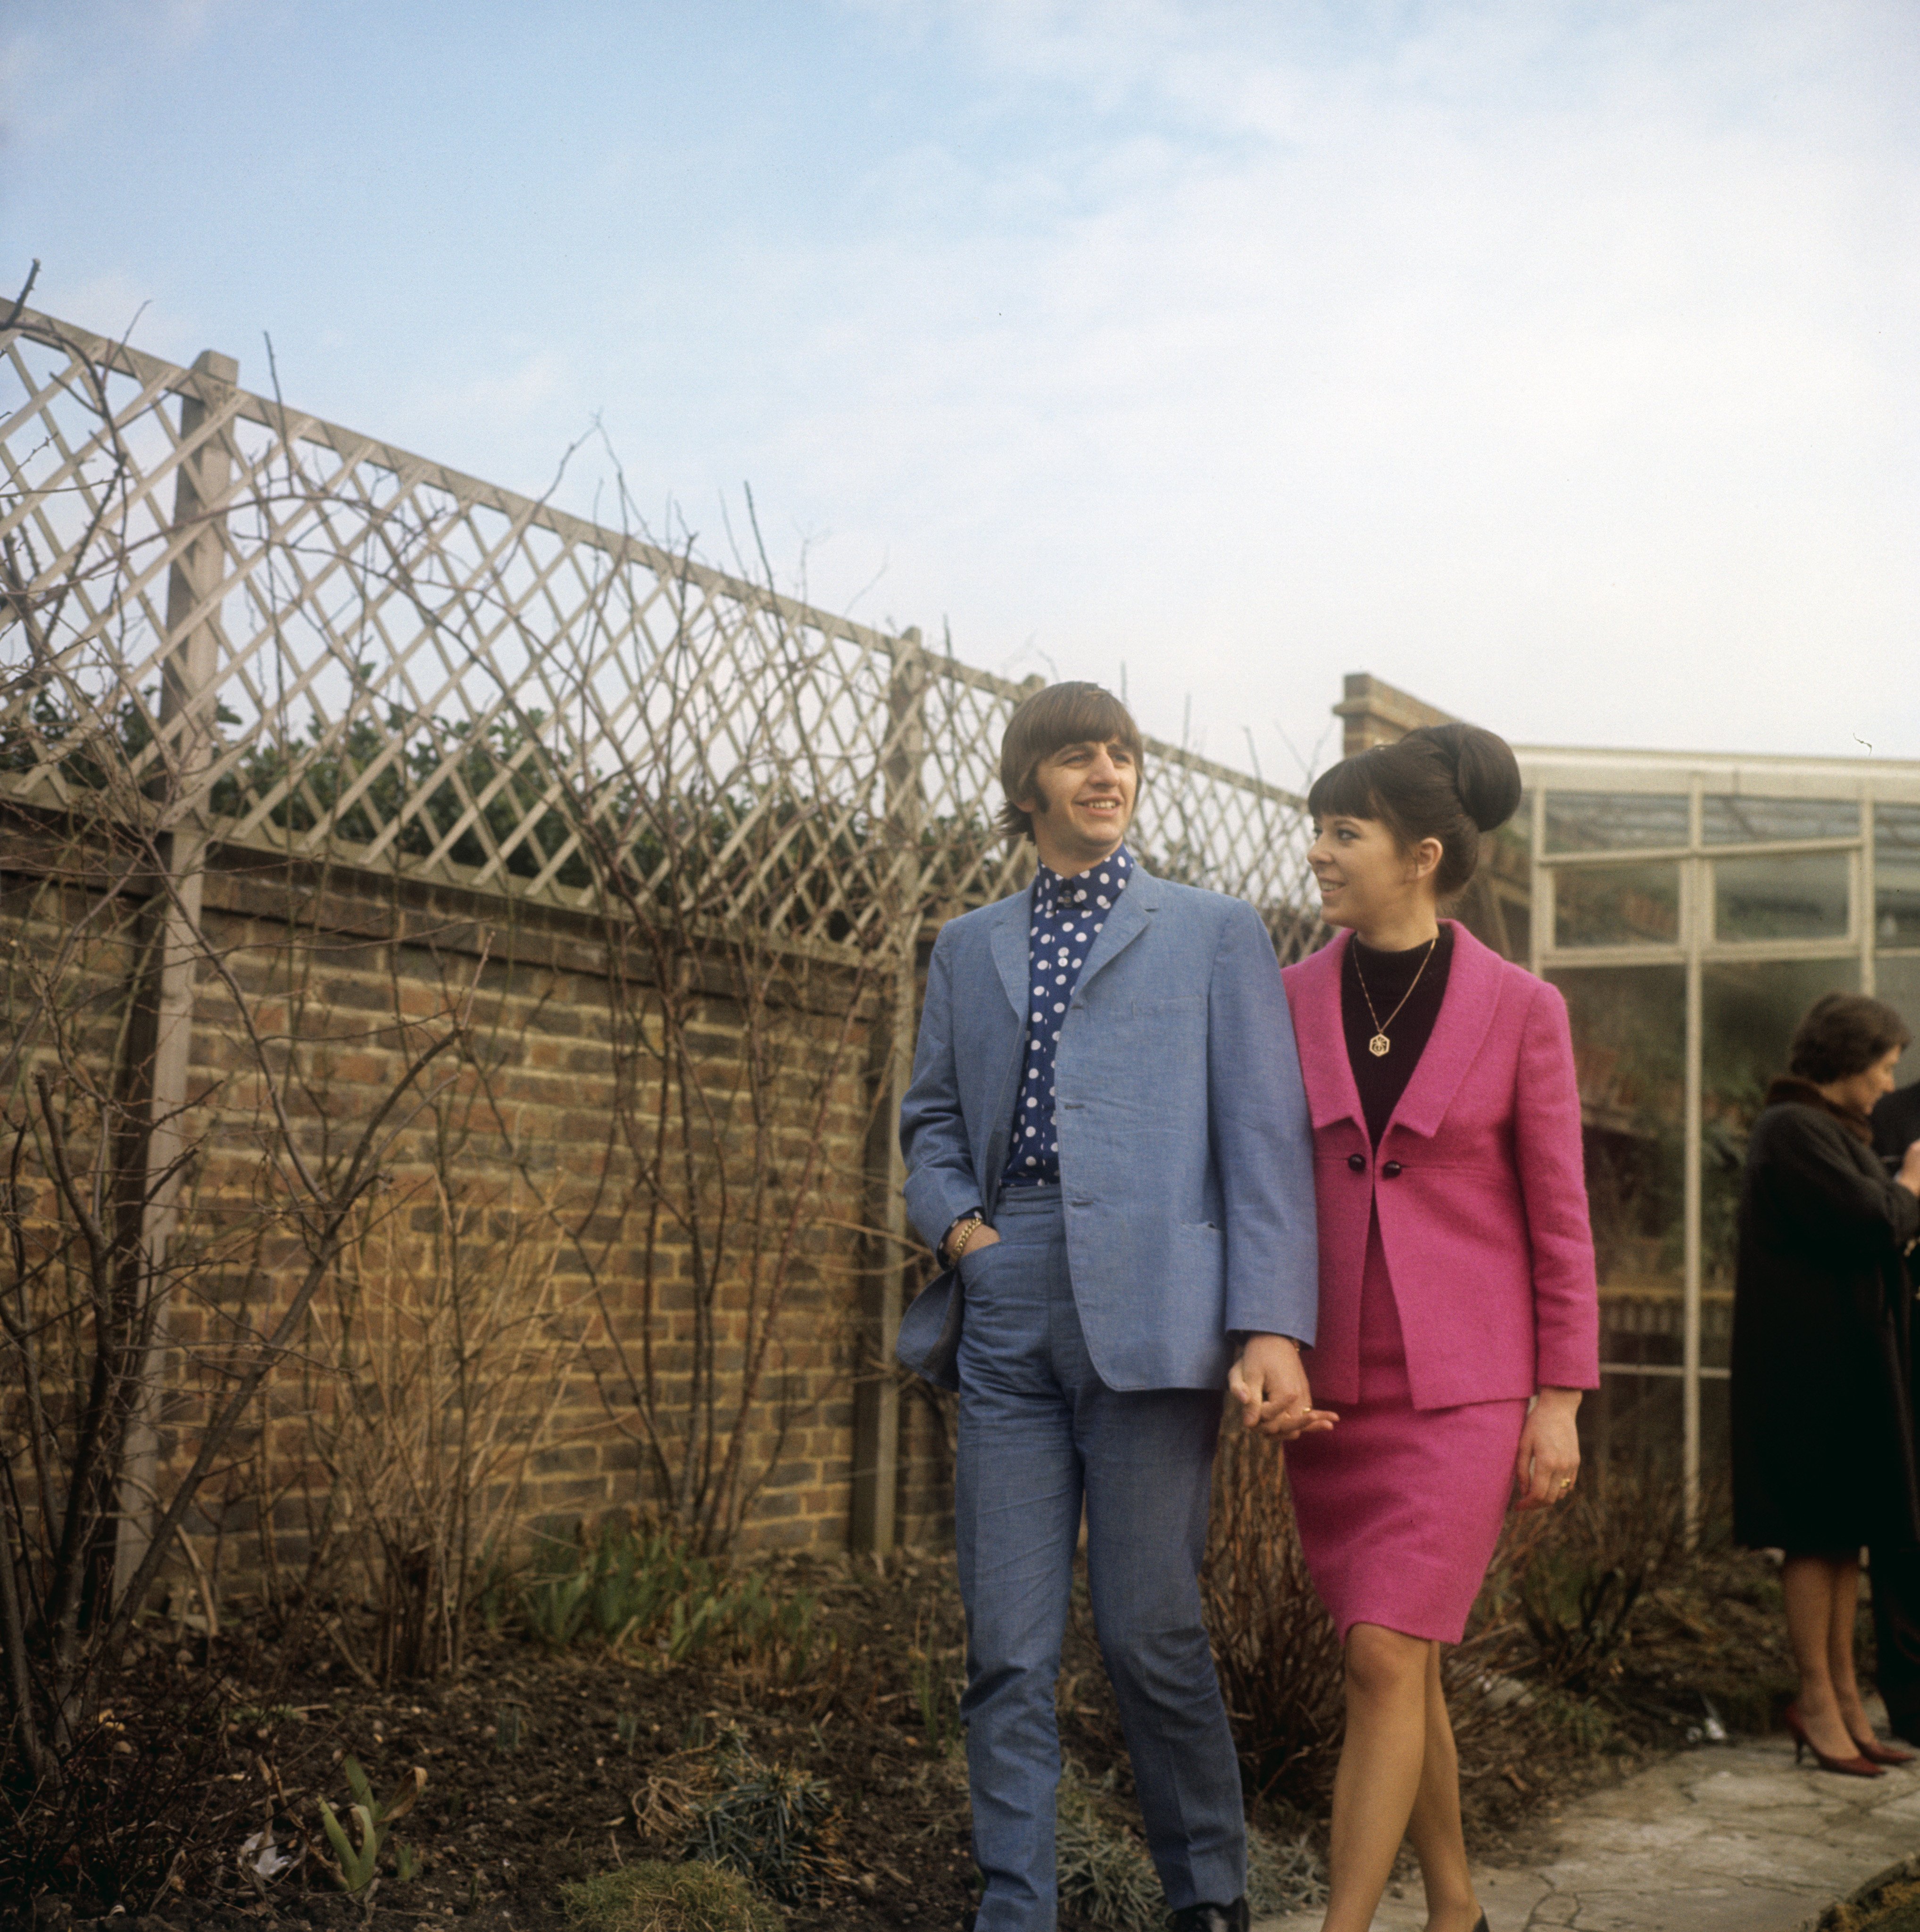 Maureen Starkey and Ringo Star Walking in Sussex during their honeymoon | Source: Getty Images